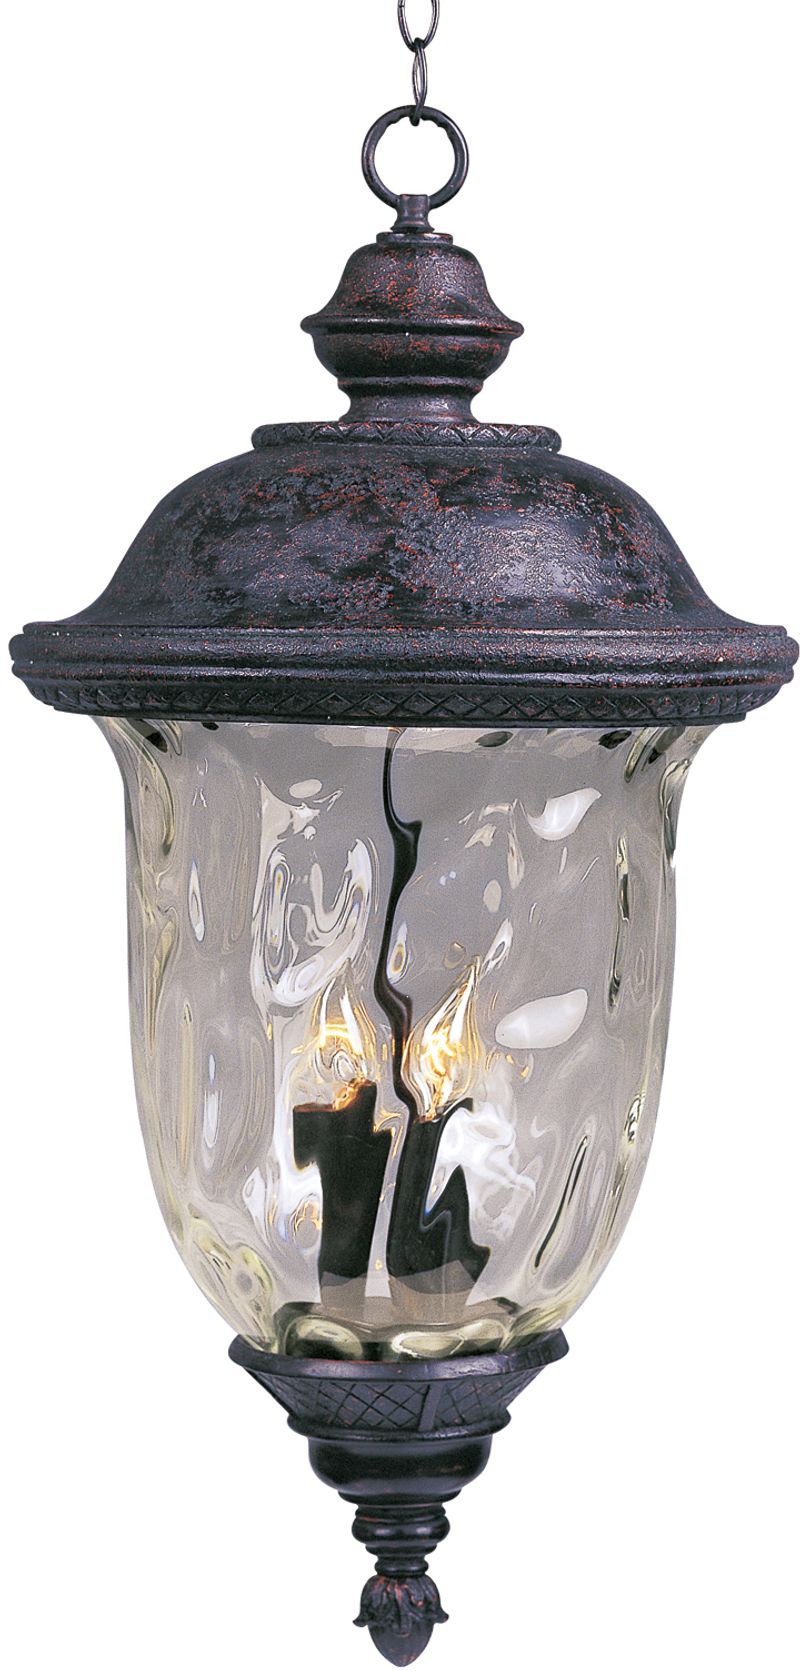 Carriage House DC 24.5' 3 light Outdoor Hanging Lantern in Oriental Bronze